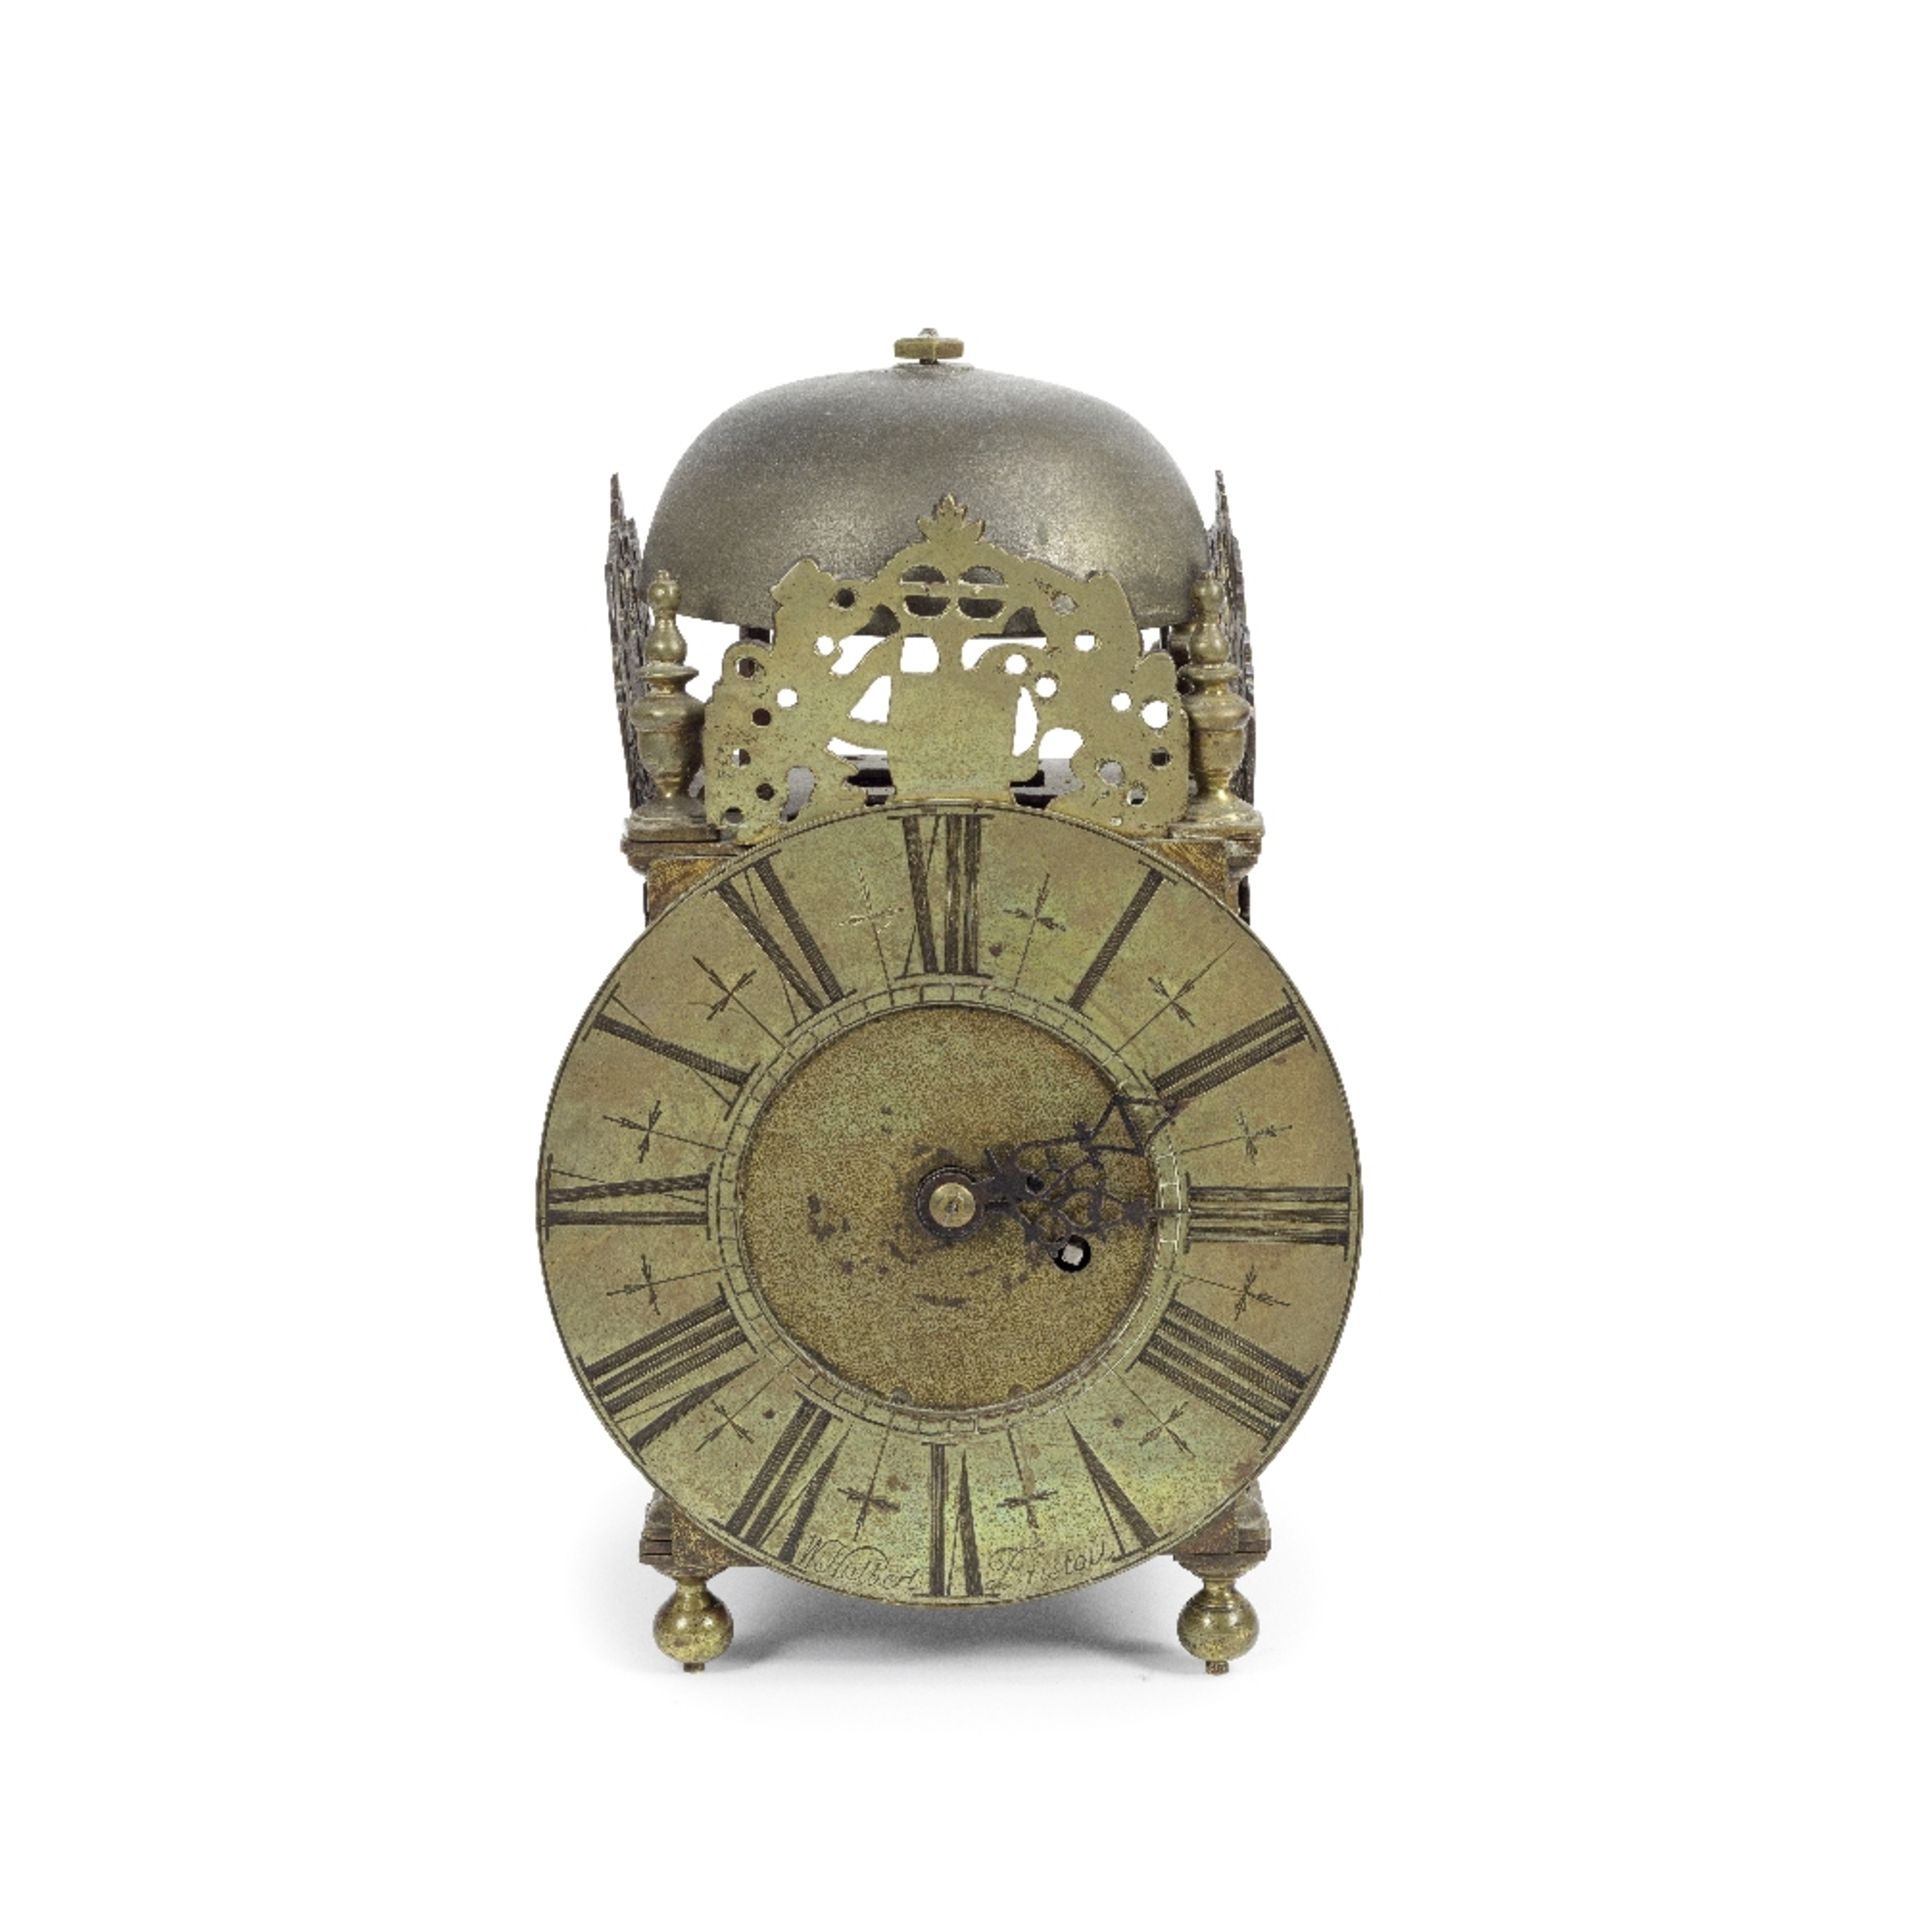 A brass lantern clock parts 18th century and later, the dial signed W. Hulbert, Bristol